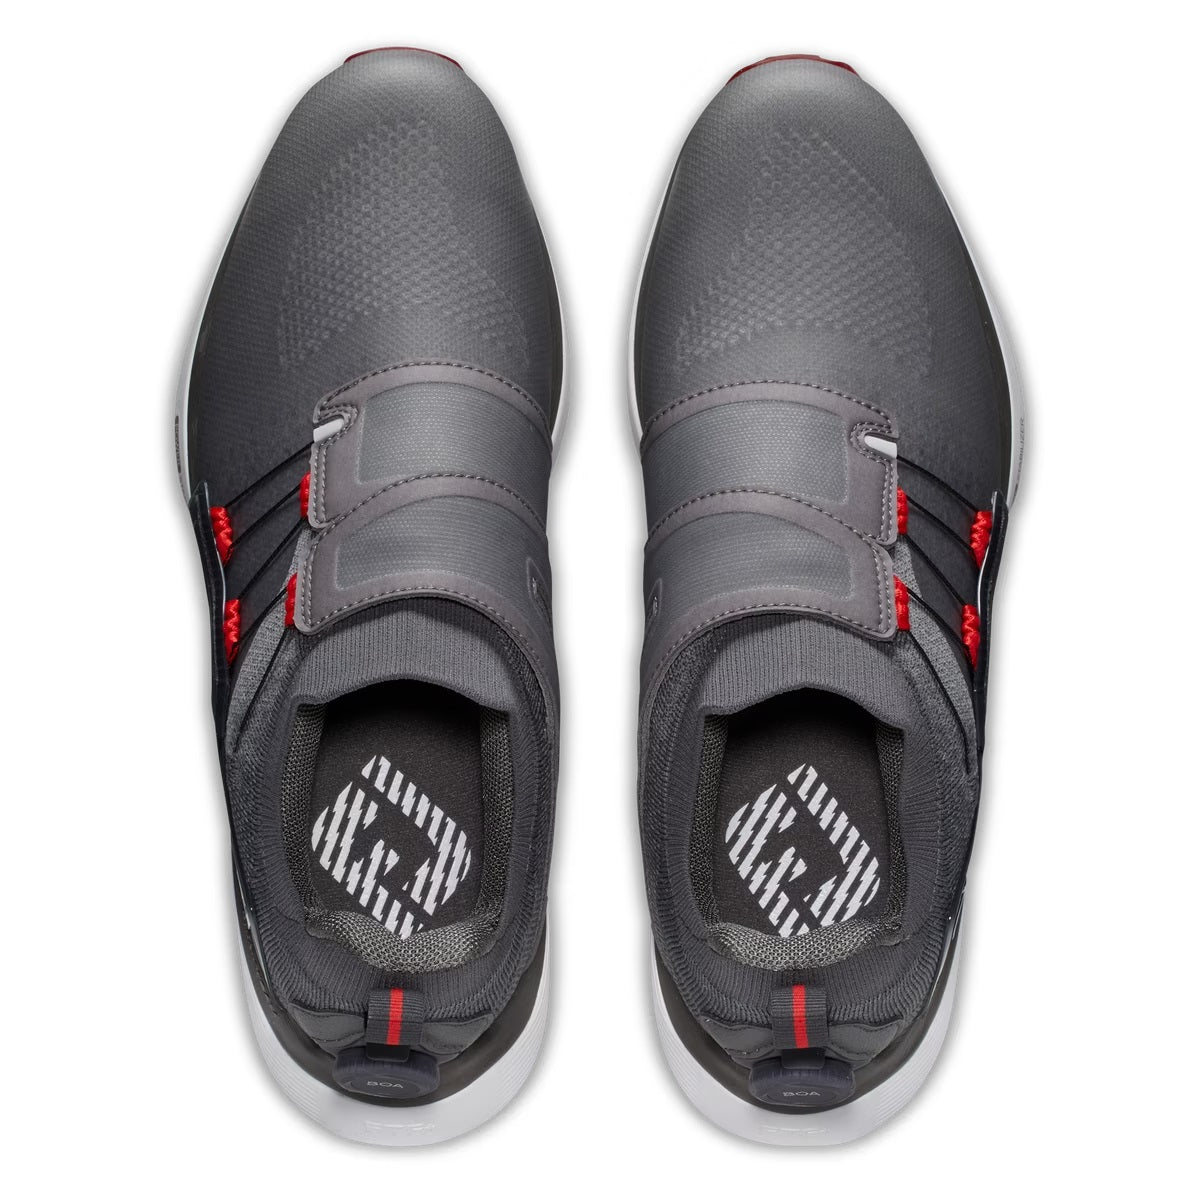 FootJoy HyperFlex BOA Golf Shoes - Charcoal/Red | Direct Now -